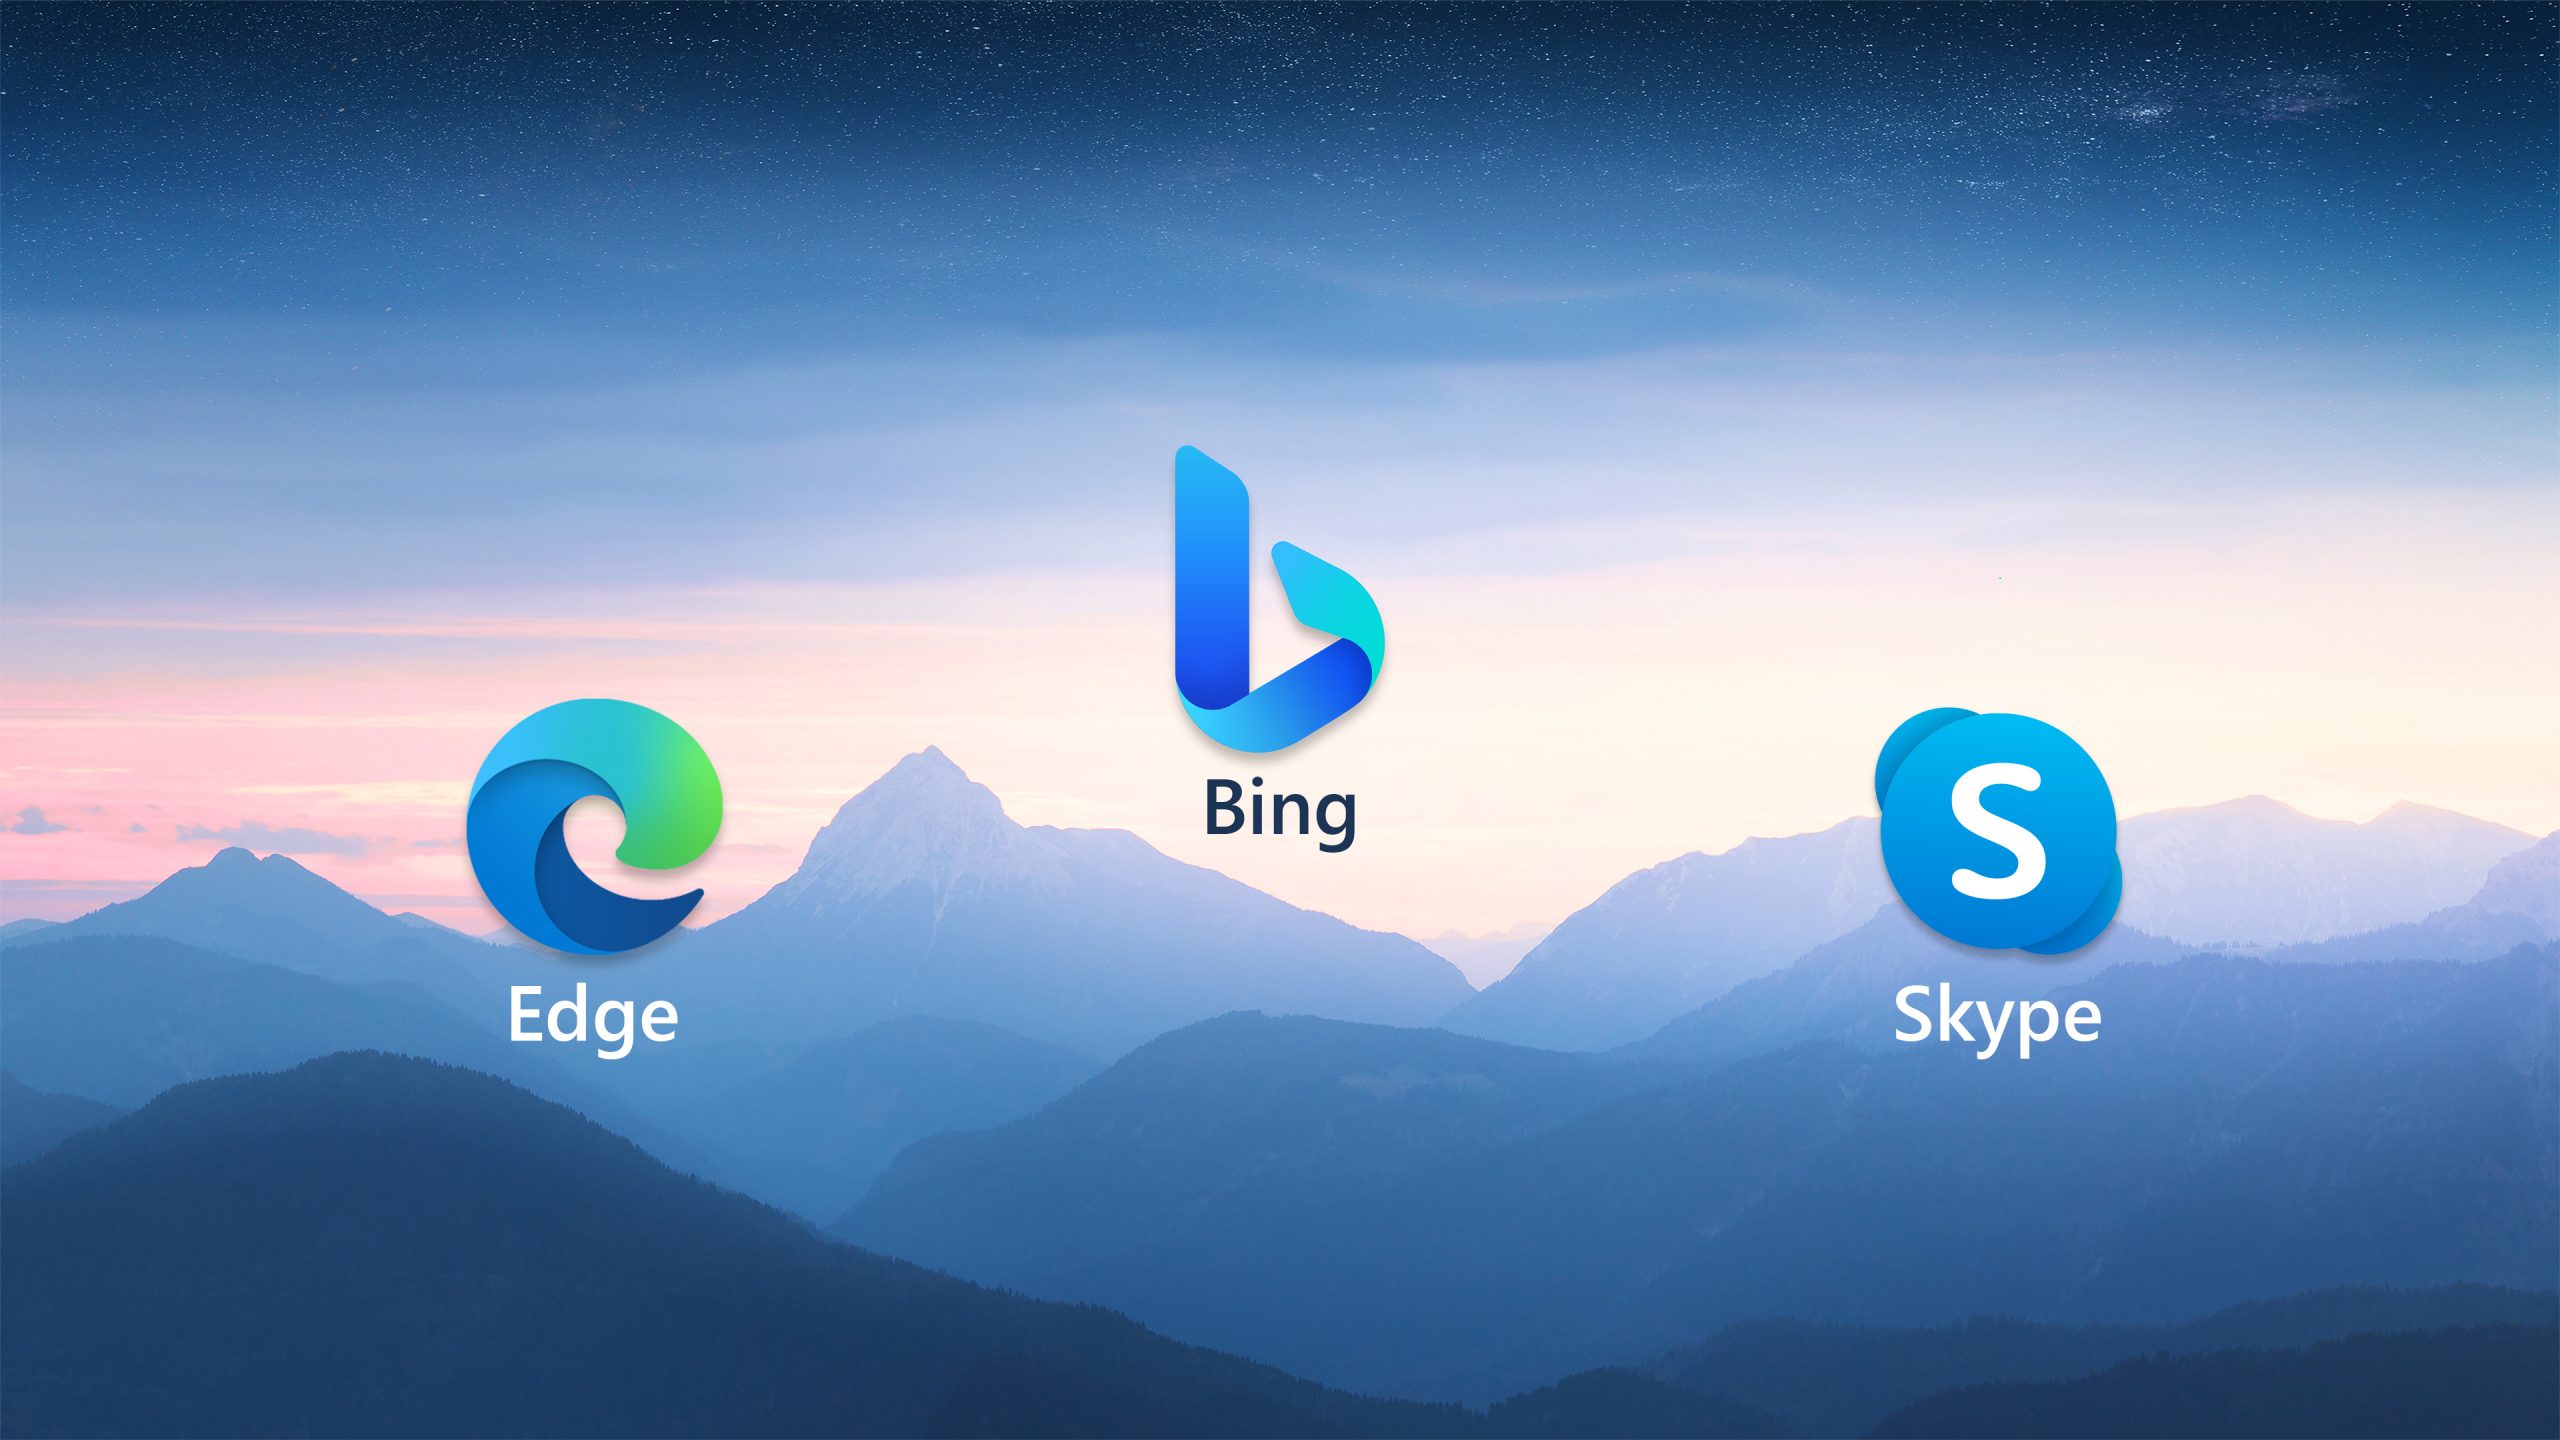 Make Your Photo the Bing Background for 24 Hours